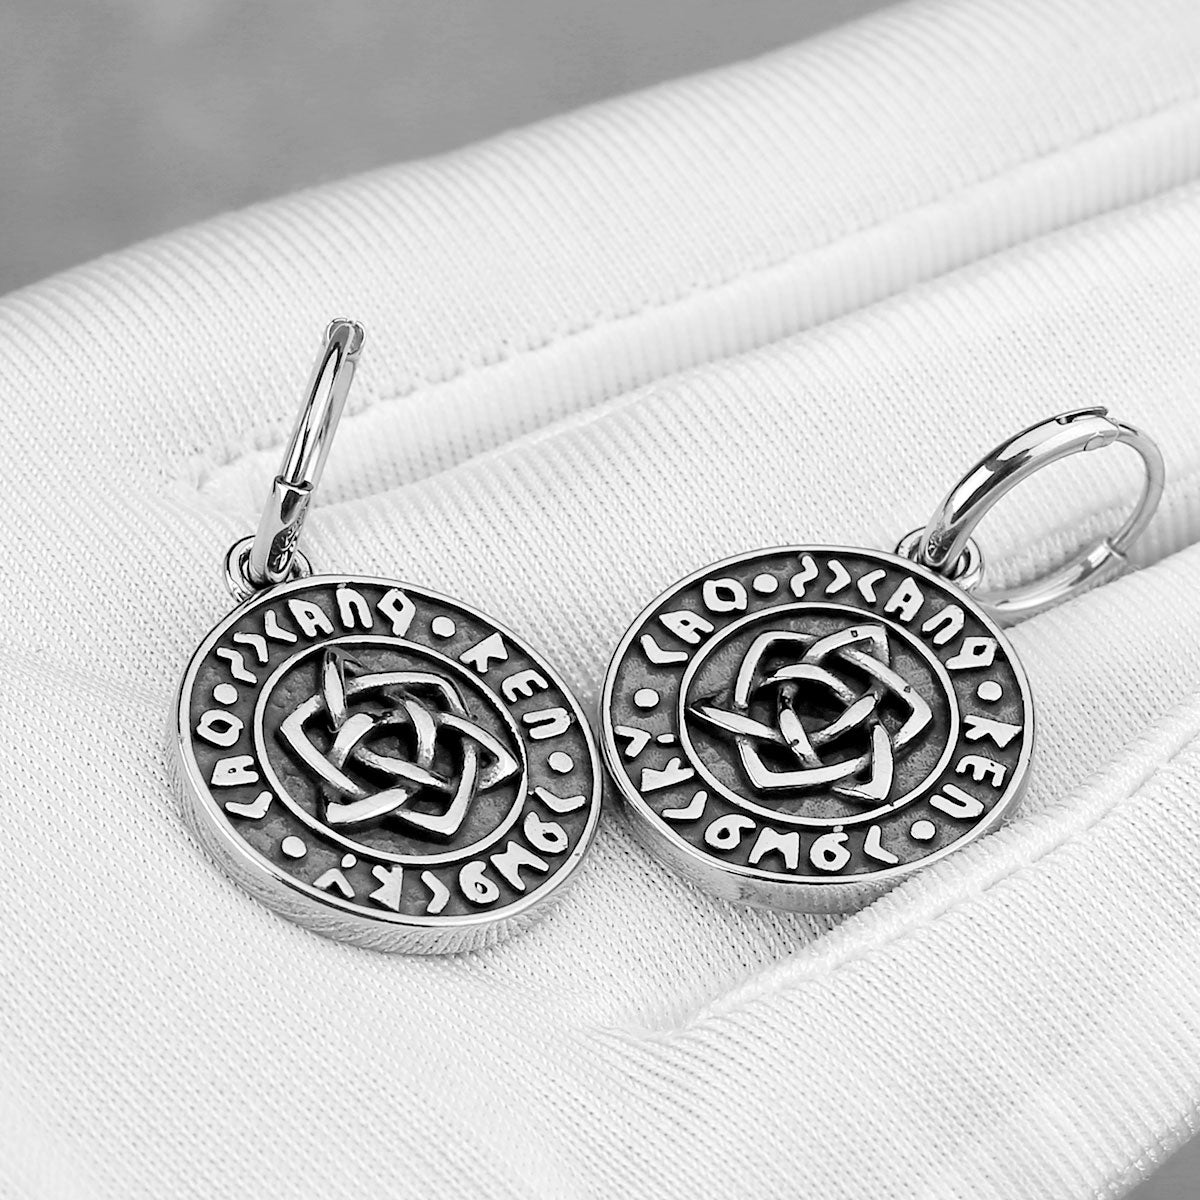 Vintage Norse Viking Rune Earrings Stainless Steel Odin Amulet Celtic Knot Accessory Hip Hop Biker Punk Jewelry Gift Default Title